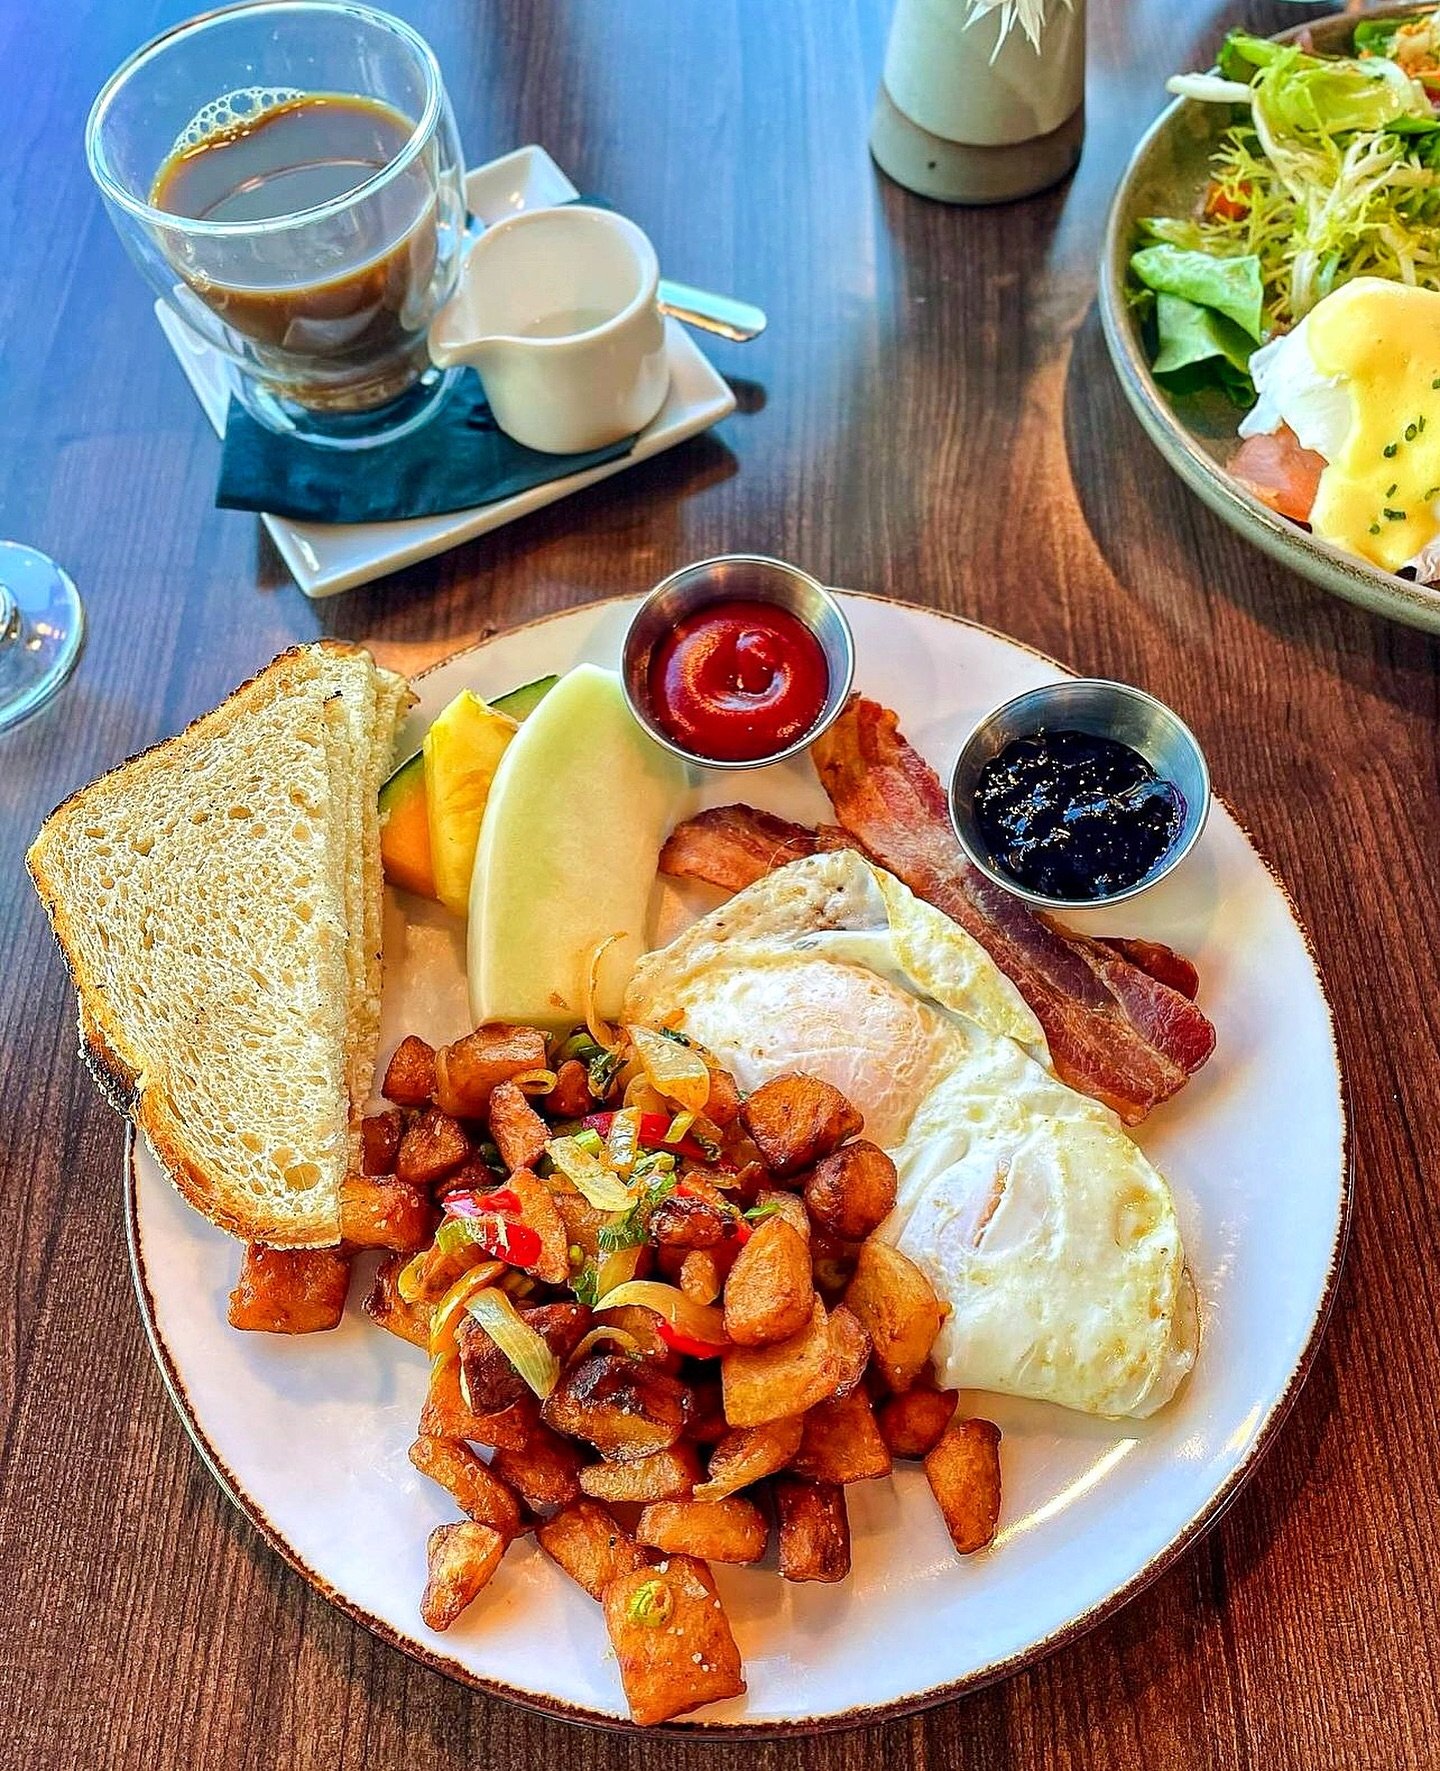 Weekends are for brunch-ing 🥂🍳🥓

Join us every Saturday &amp; Sunday from 10:30am to 2pm for brunch on the waterfront! 

📸 @craftbrews_and_localchews 
&bull;⠀⠀⠀
&bull;⠀⠀
&bull;⠀
#aquaterrakingston #feaston #downtownkingston #visitkingston #yumgk